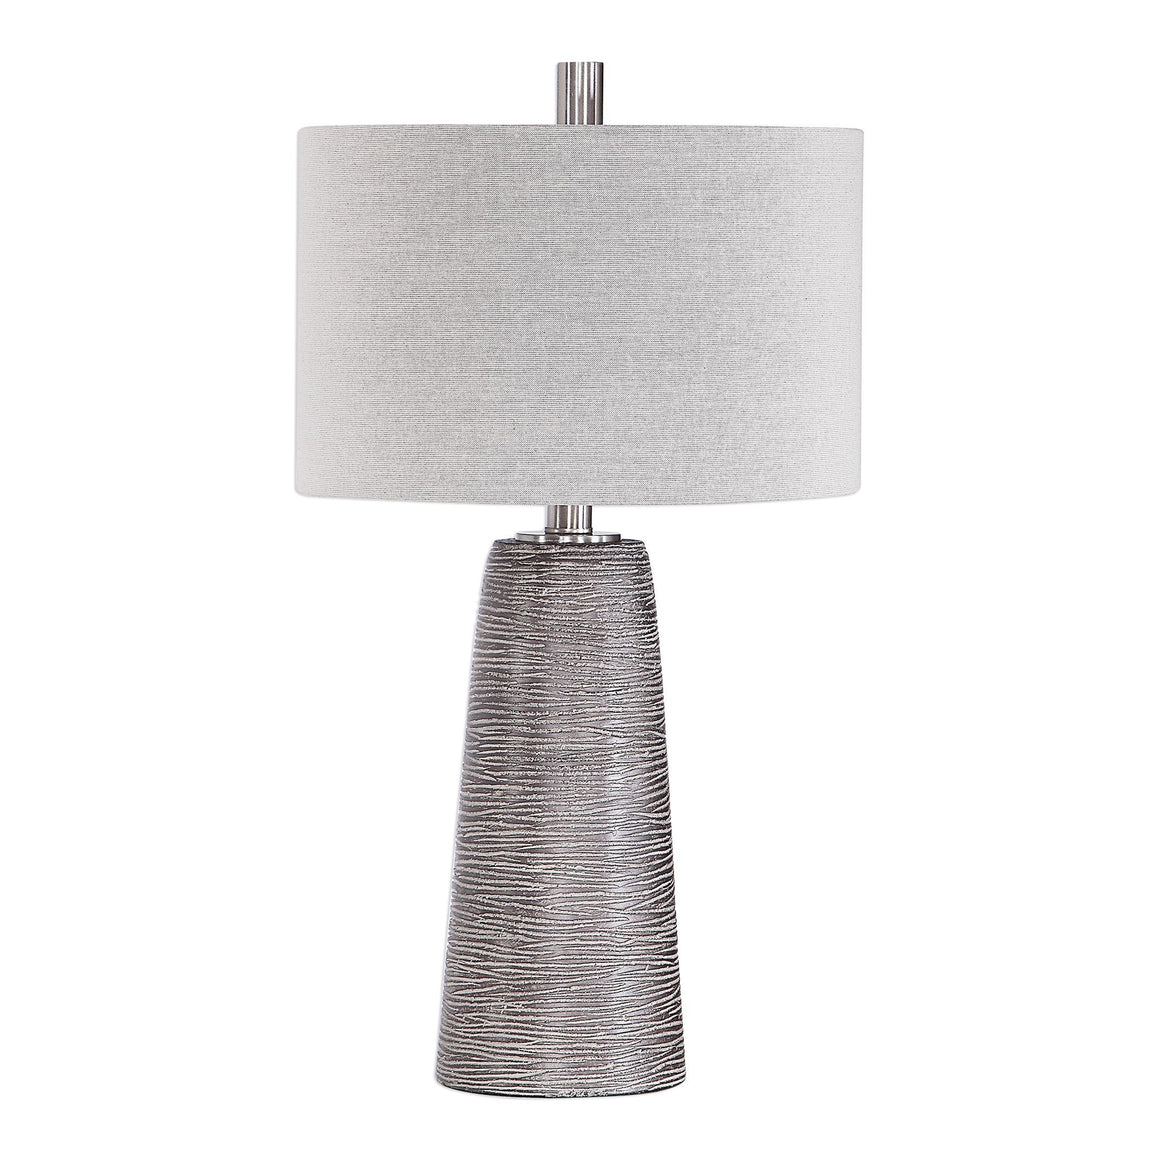 Etched Texture Ceramic Table Lamp-Light Gray Wash